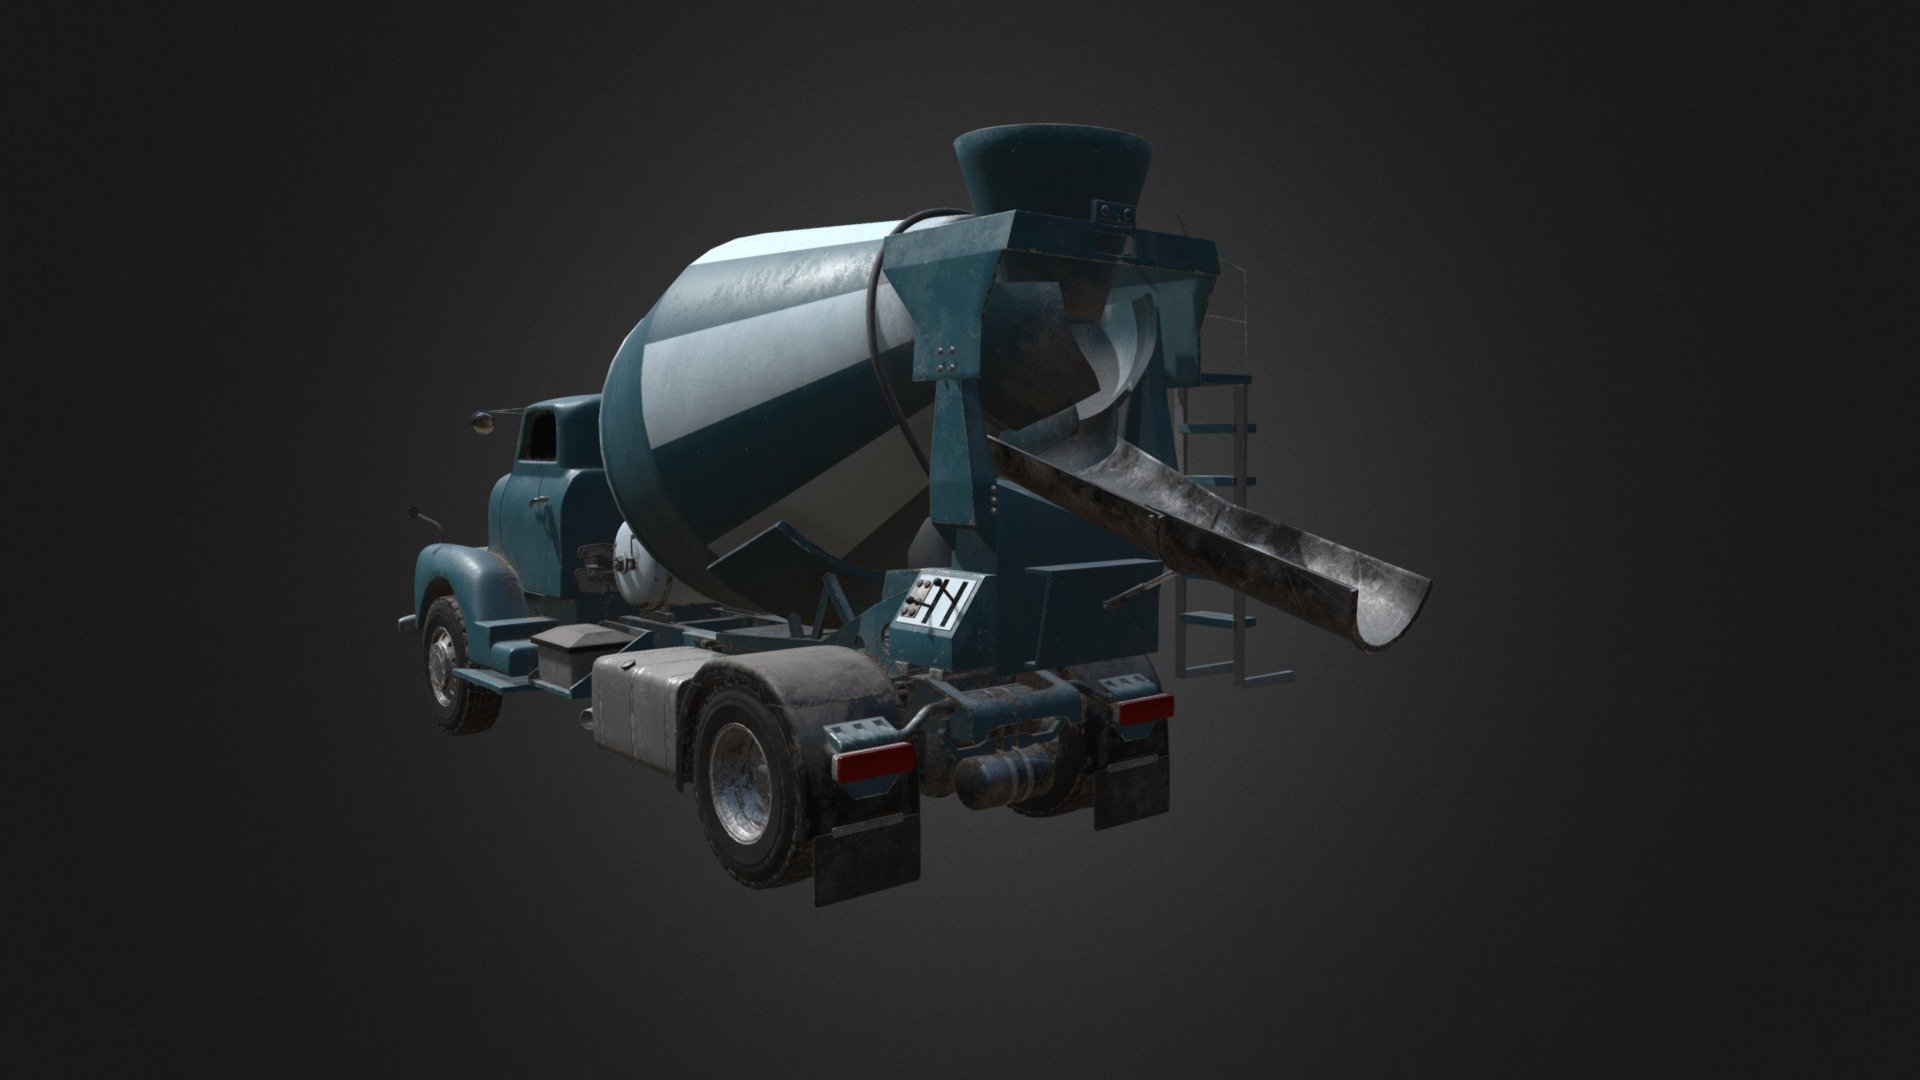 Created in 2017 for the Constructor Plus Intro / Trailer video.
https://www.youtube.com/watch?v=aknL0ESR8JE - Concrete Mixer Truck - Constructor Plus - 3D model by Mucsi Tamás 3D (@mucsitamas3d) 3d model